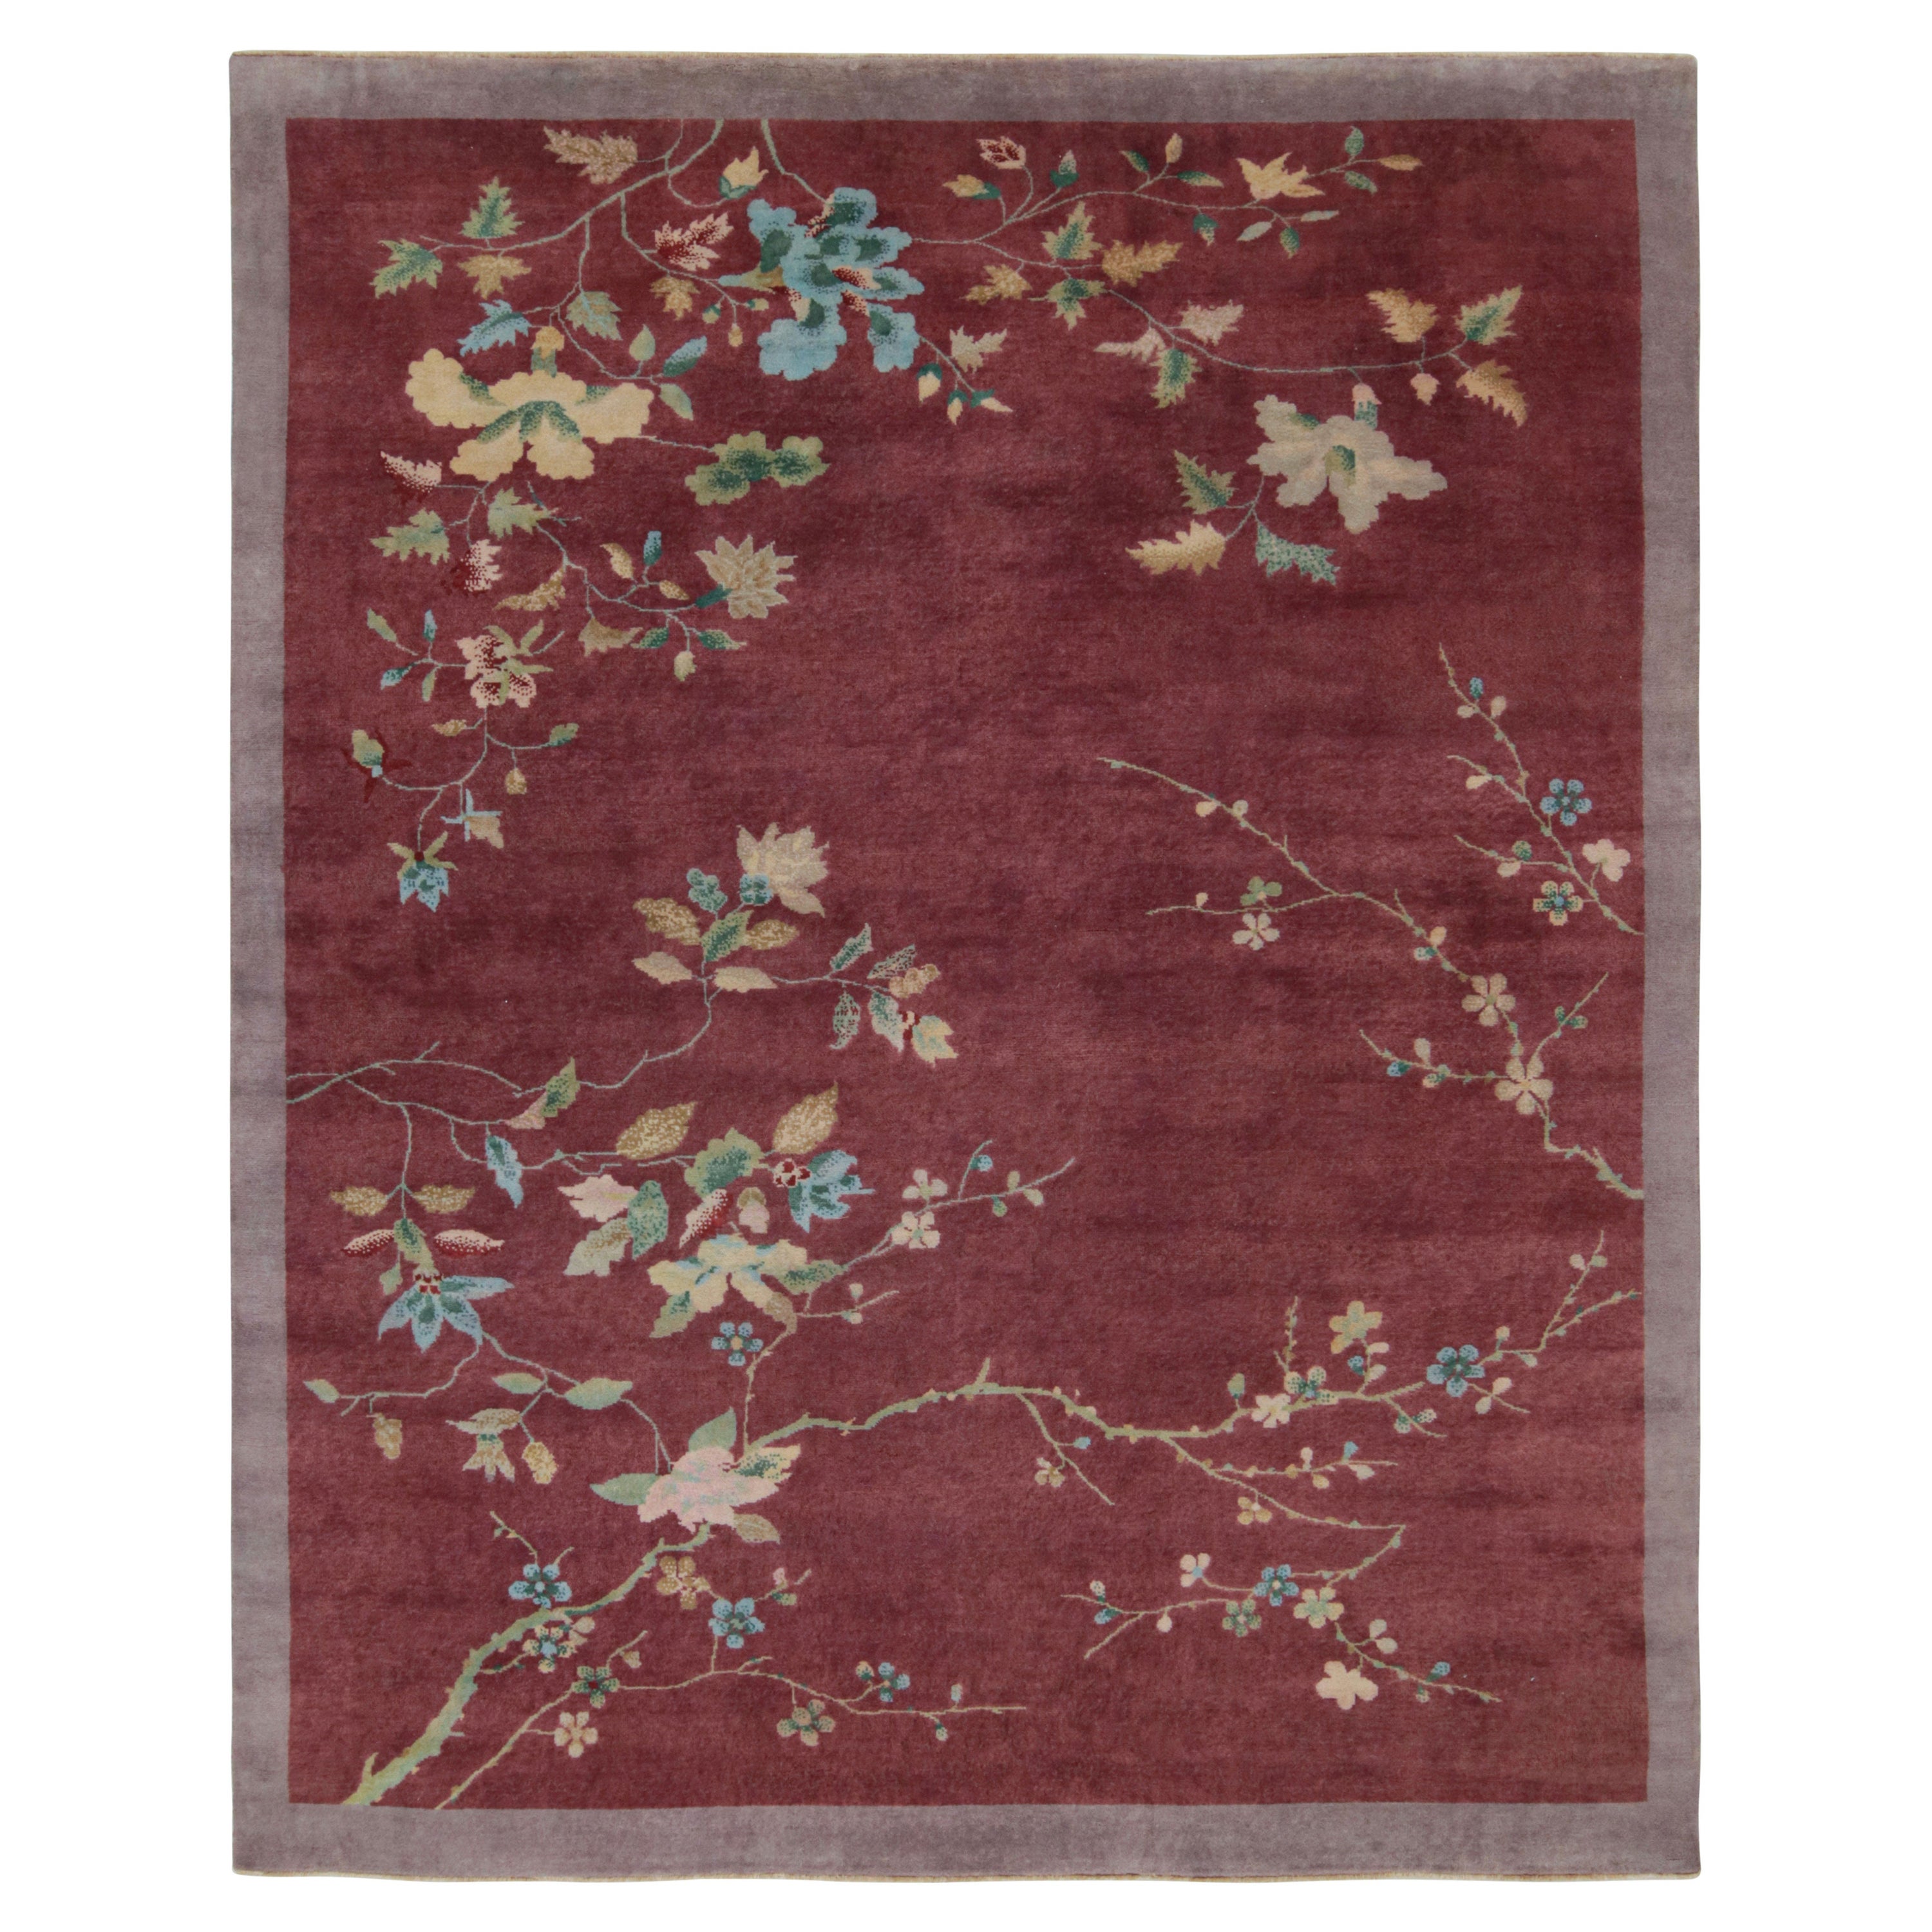 Rug & Kilim’s Chinese Art Deco style rug, with Geometric Floral Patterns